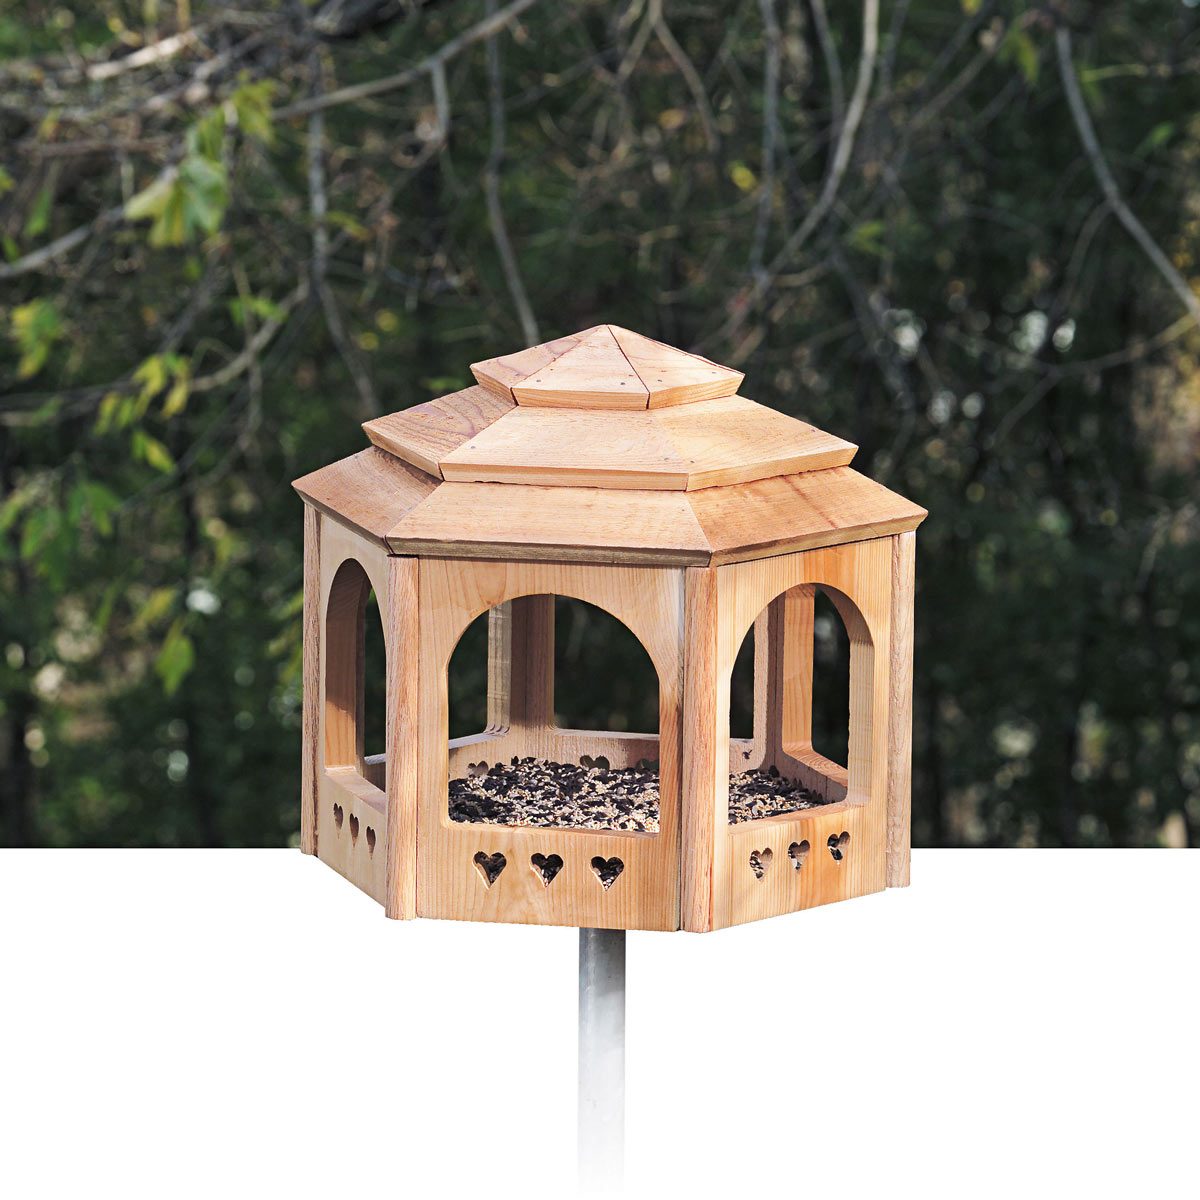 What is the best finish for a wooden bird feeder